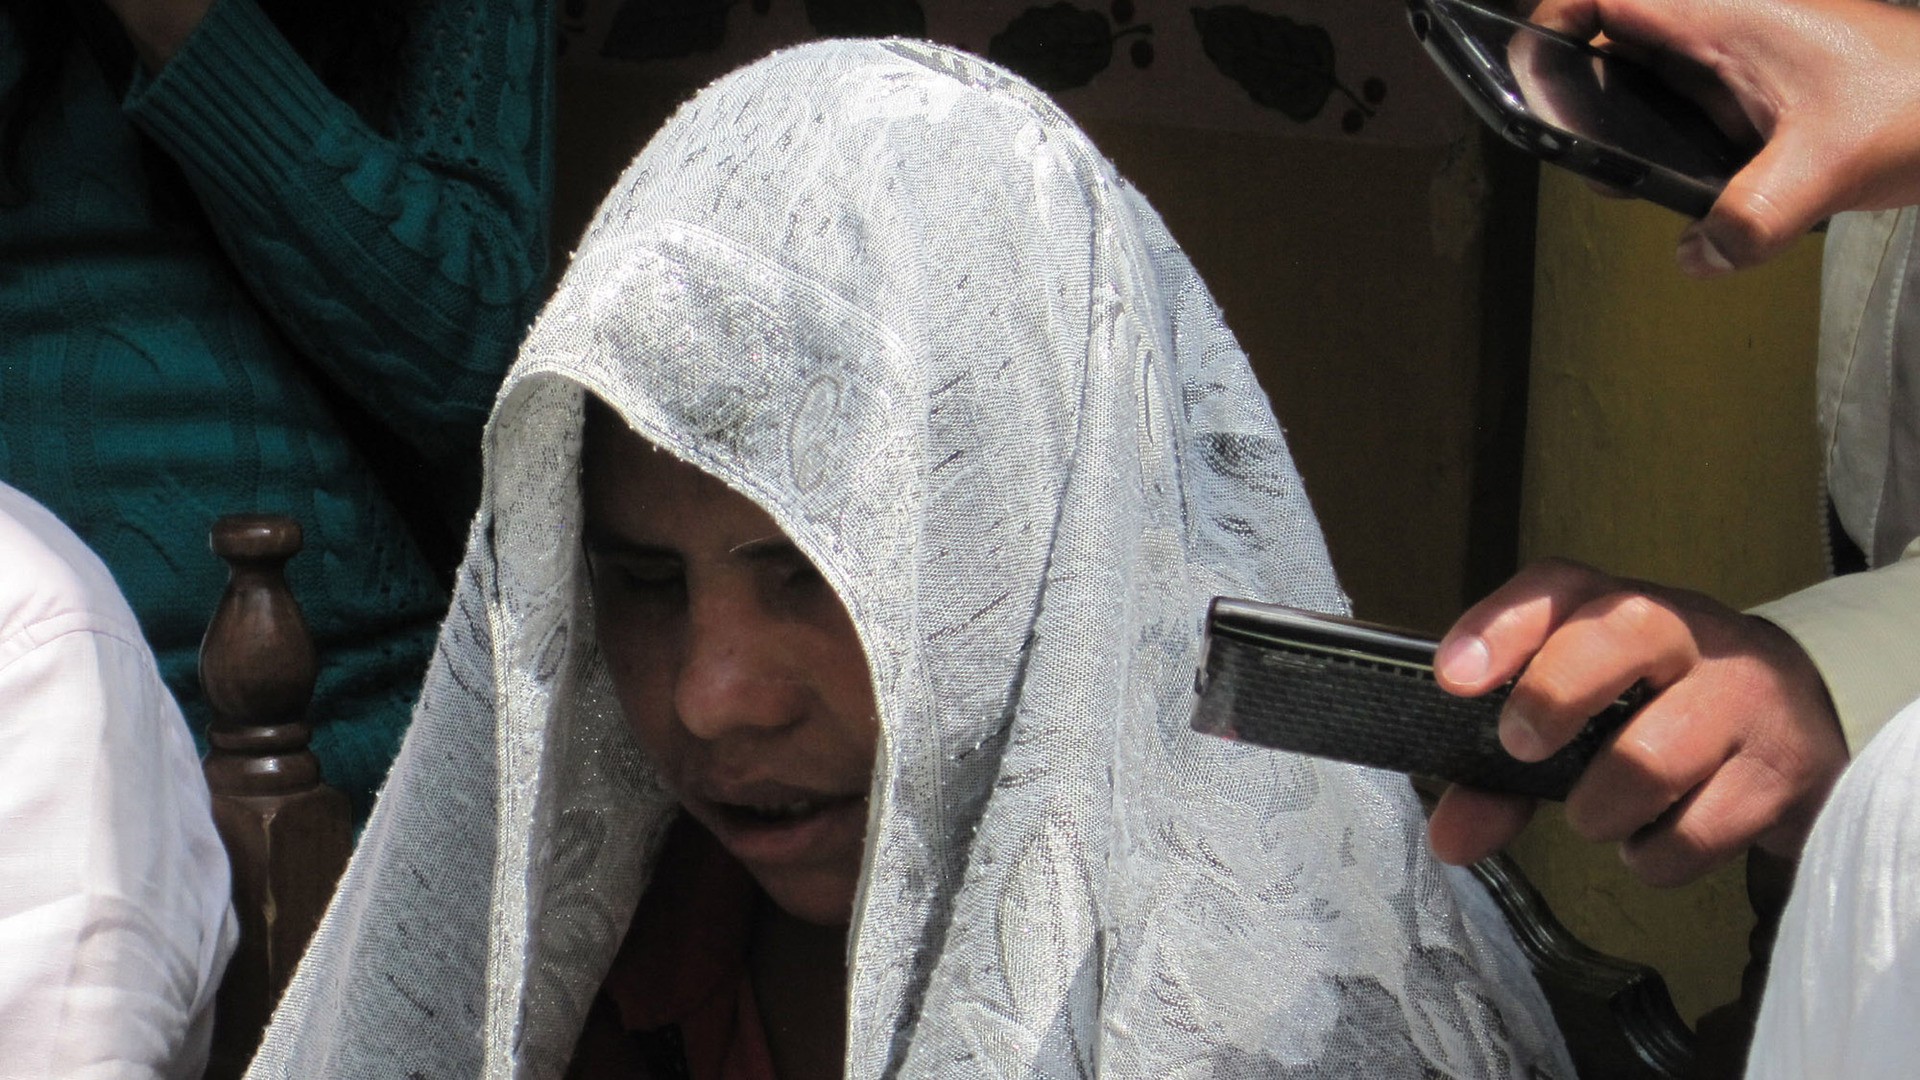 Lesvia Entzin Gómez tells reporters in San Cristóbal de las Casas, Chiapas, Mex., about the day in July 2013 when her husband shot and blinded her. (Photo by Laurie Liles.)